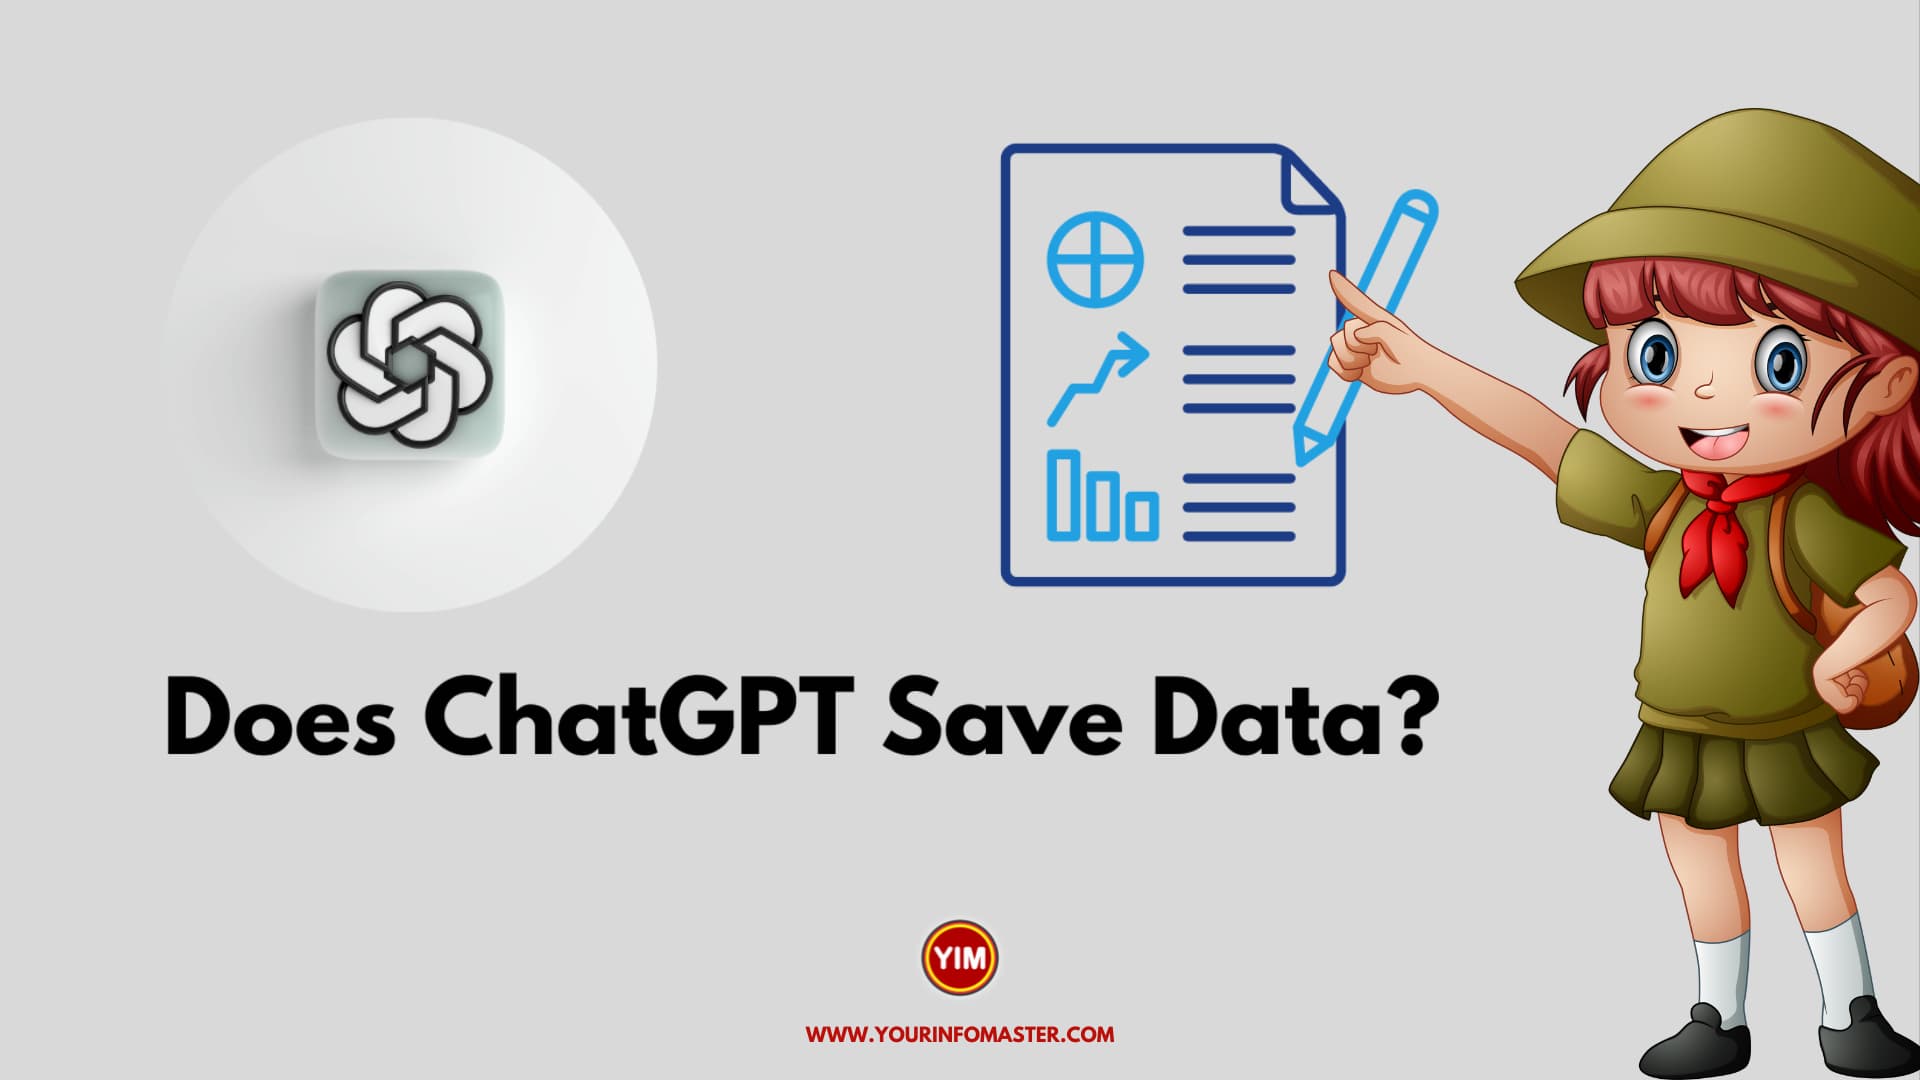 Does ChatGPT save data